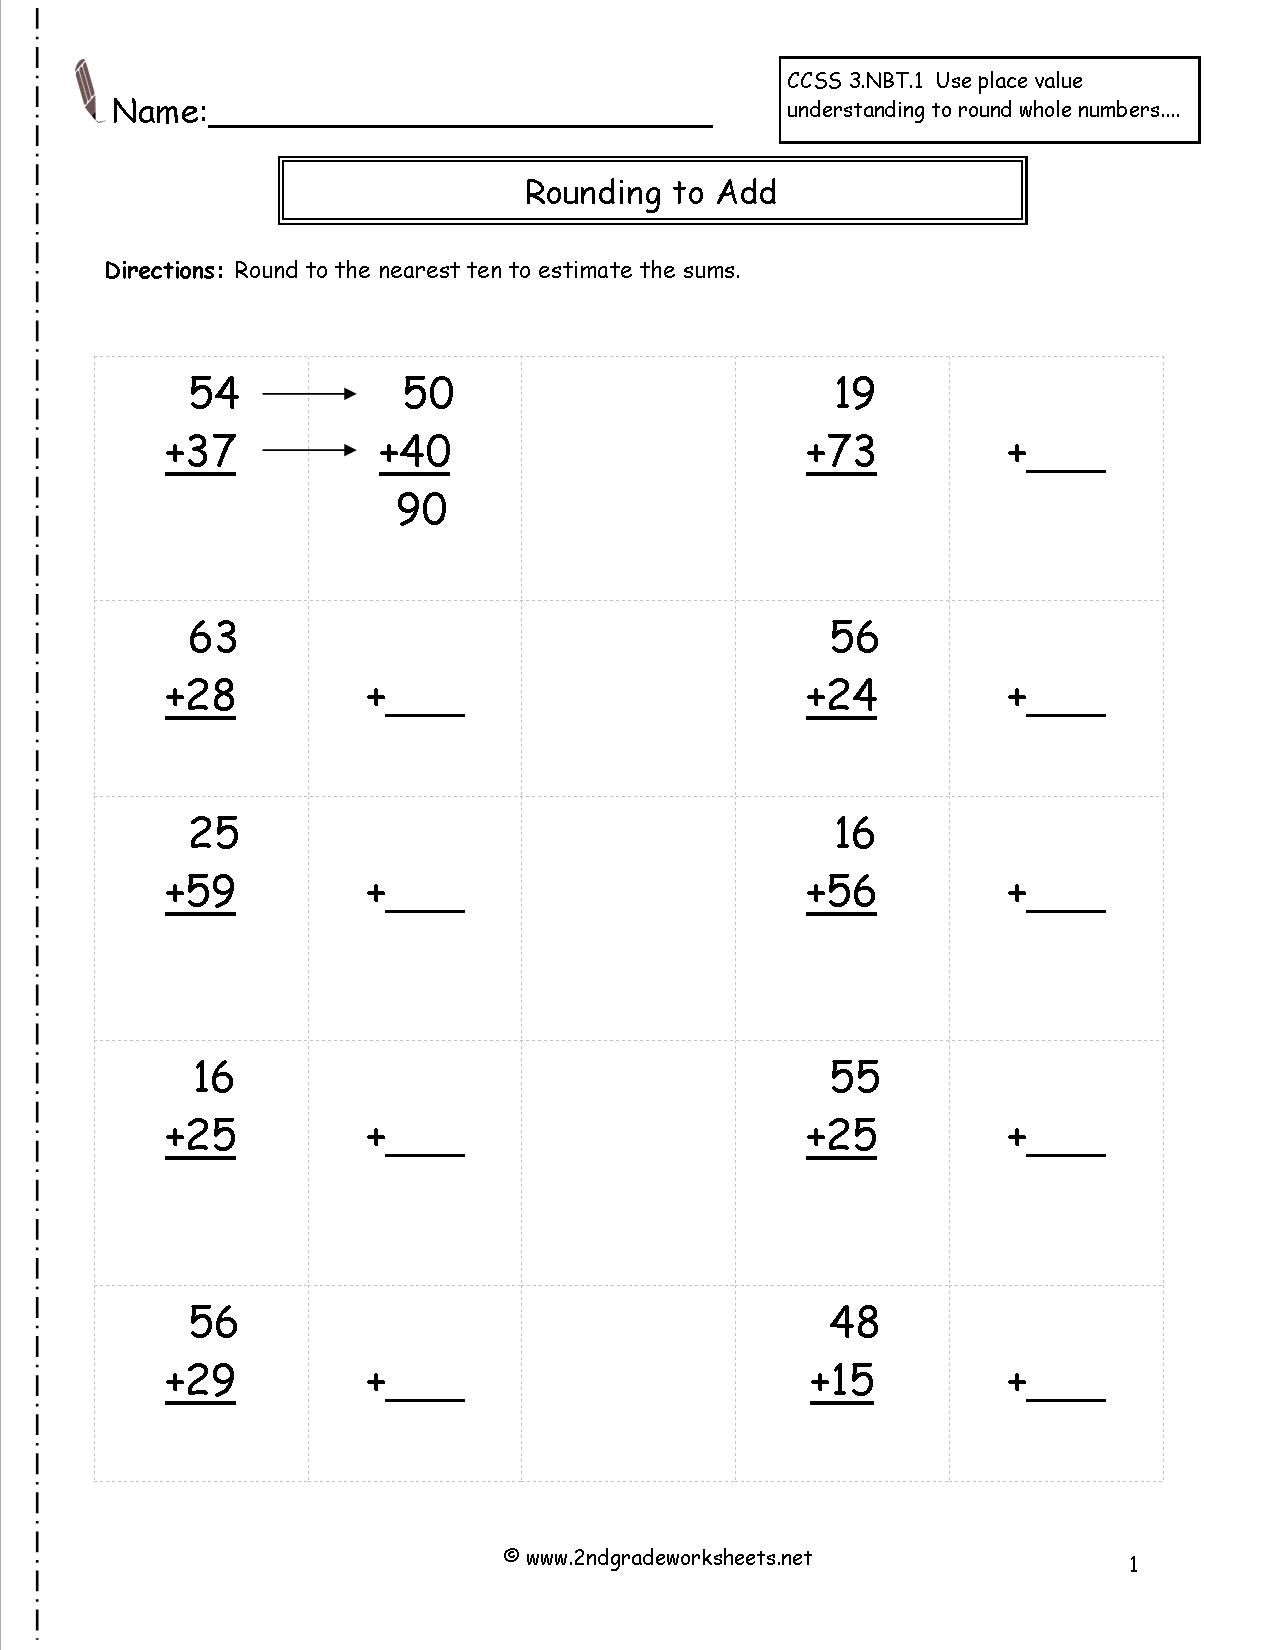 Estimating Sums And Differences Worksheets